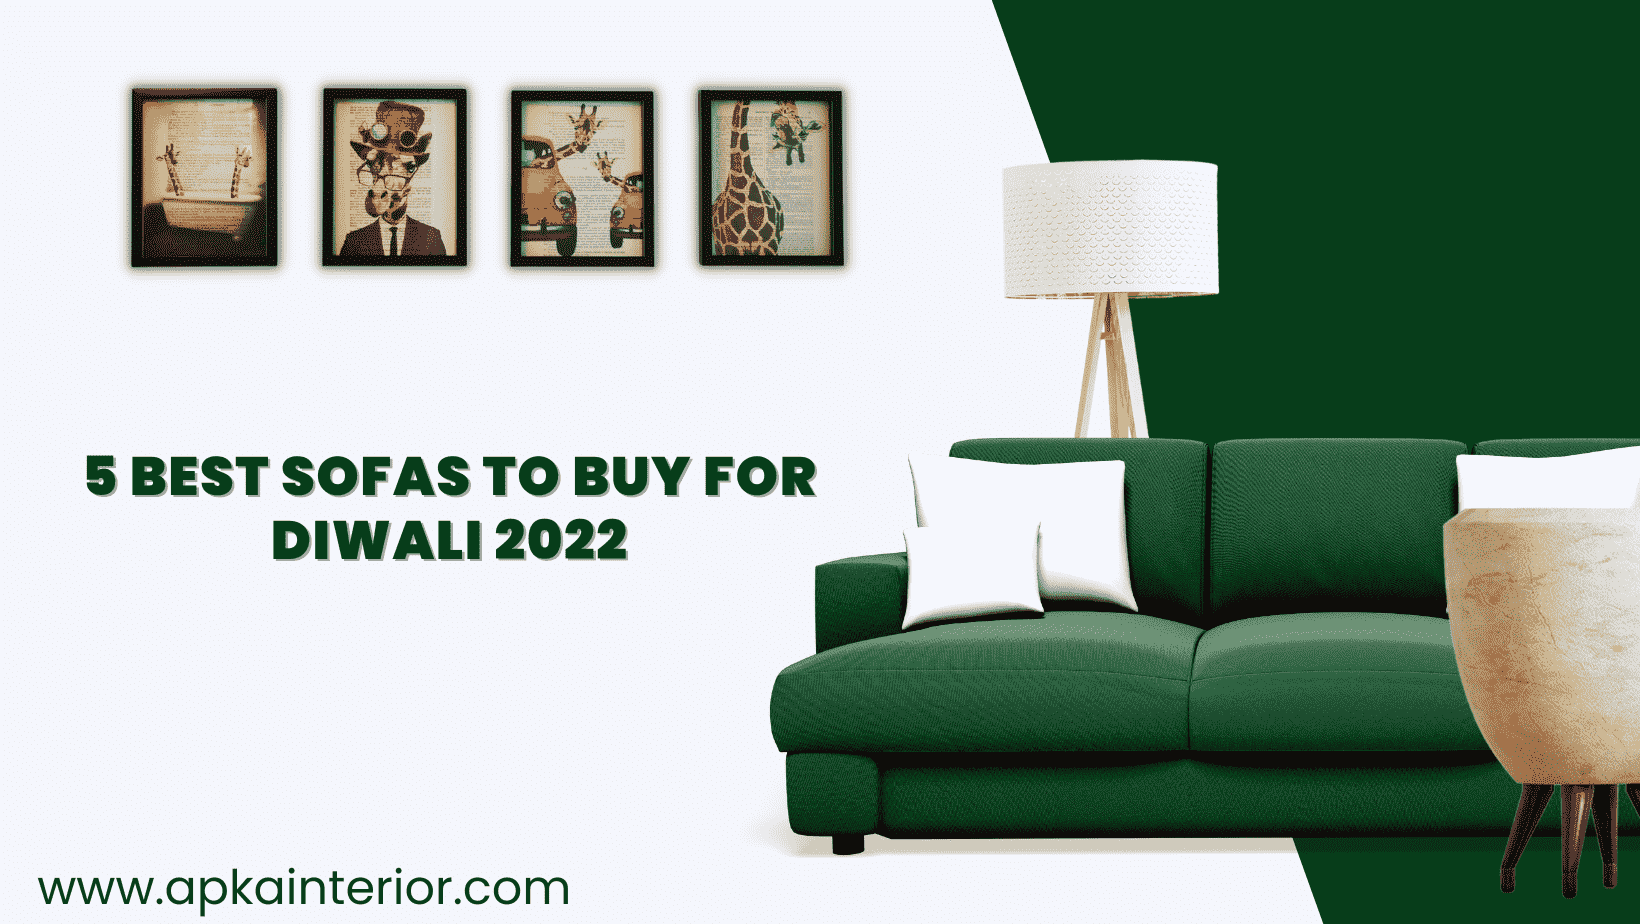 Five best sofas to buy for Diwal-2f9d7978